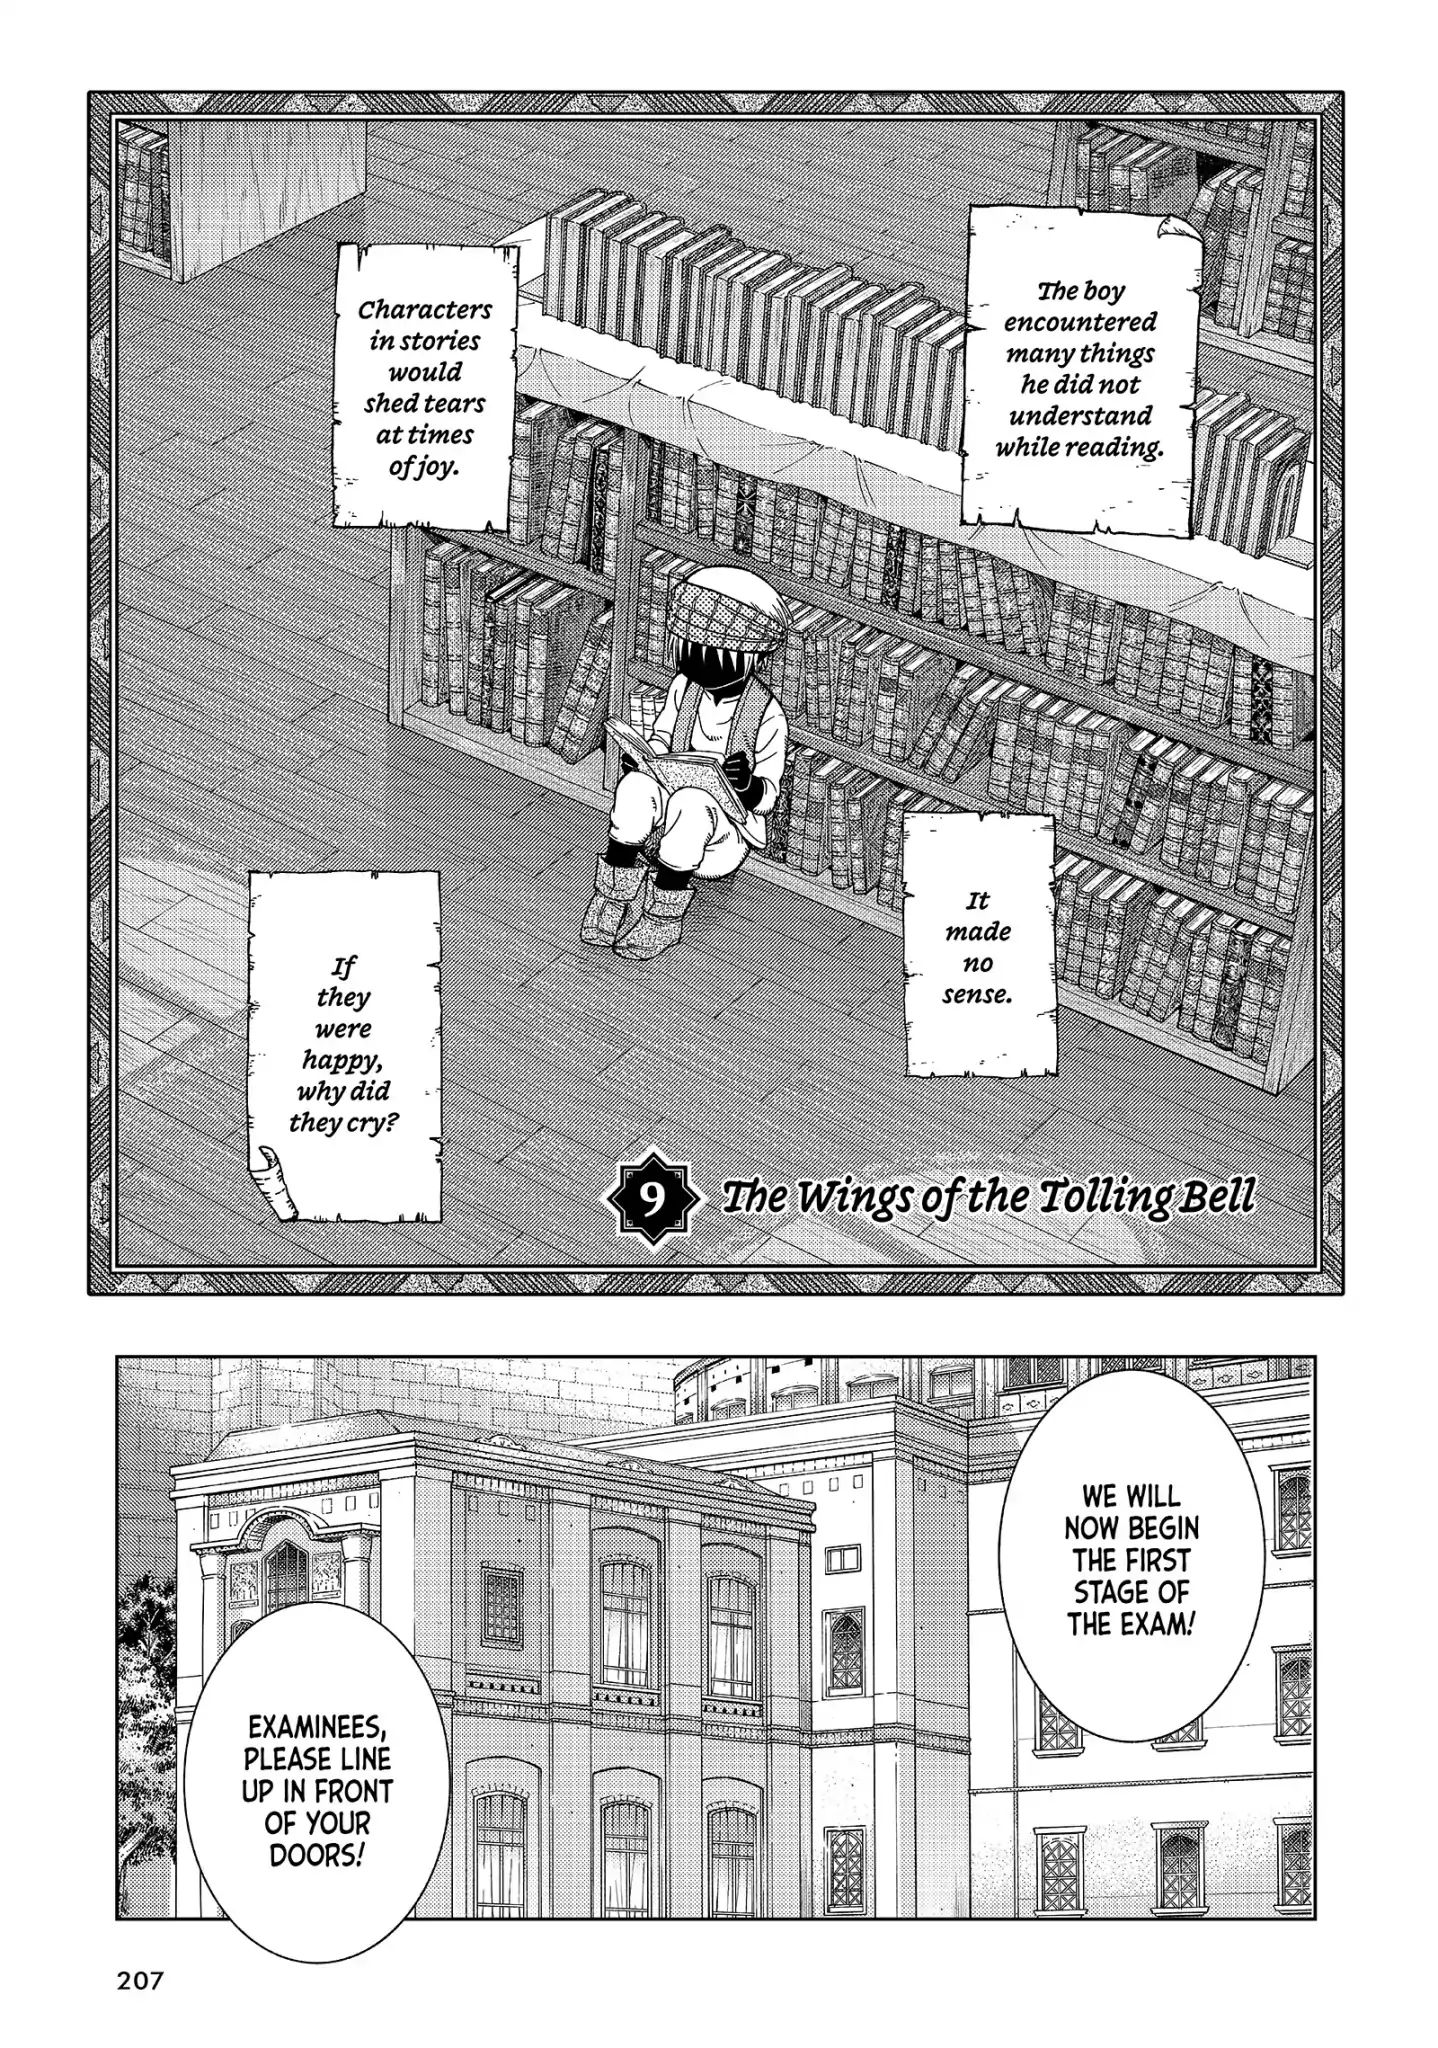 Toshokan No Daimajutsushi Vol.2 Chapter 9: The Wings Of The Tolling Bell - Picture 1